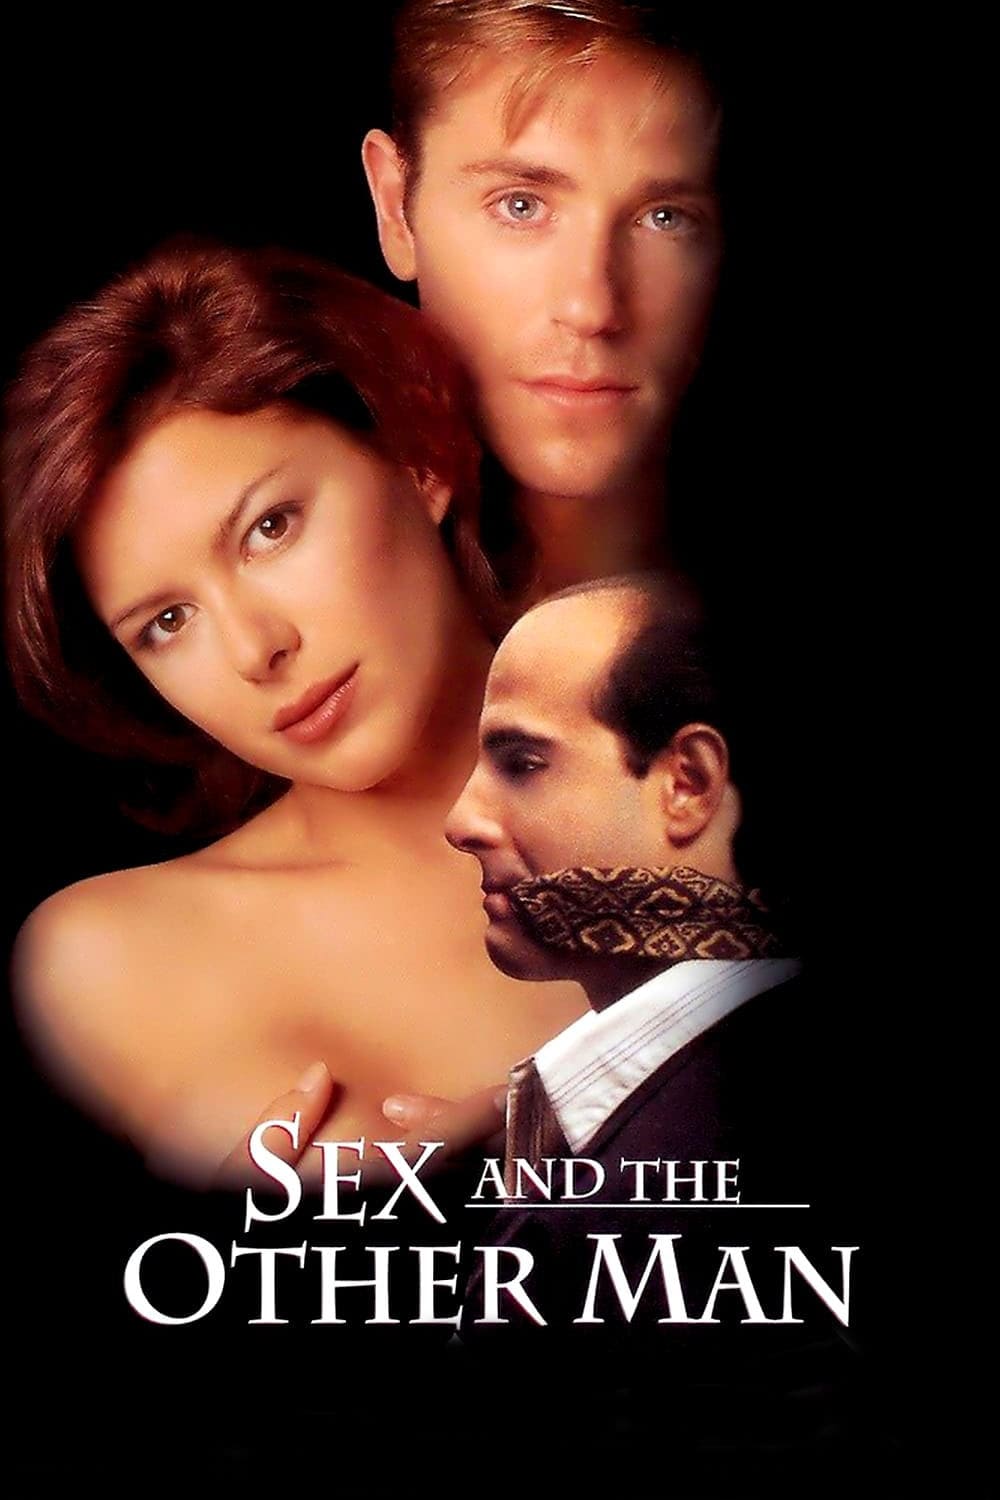 Sex and the Other Man (1995) pic